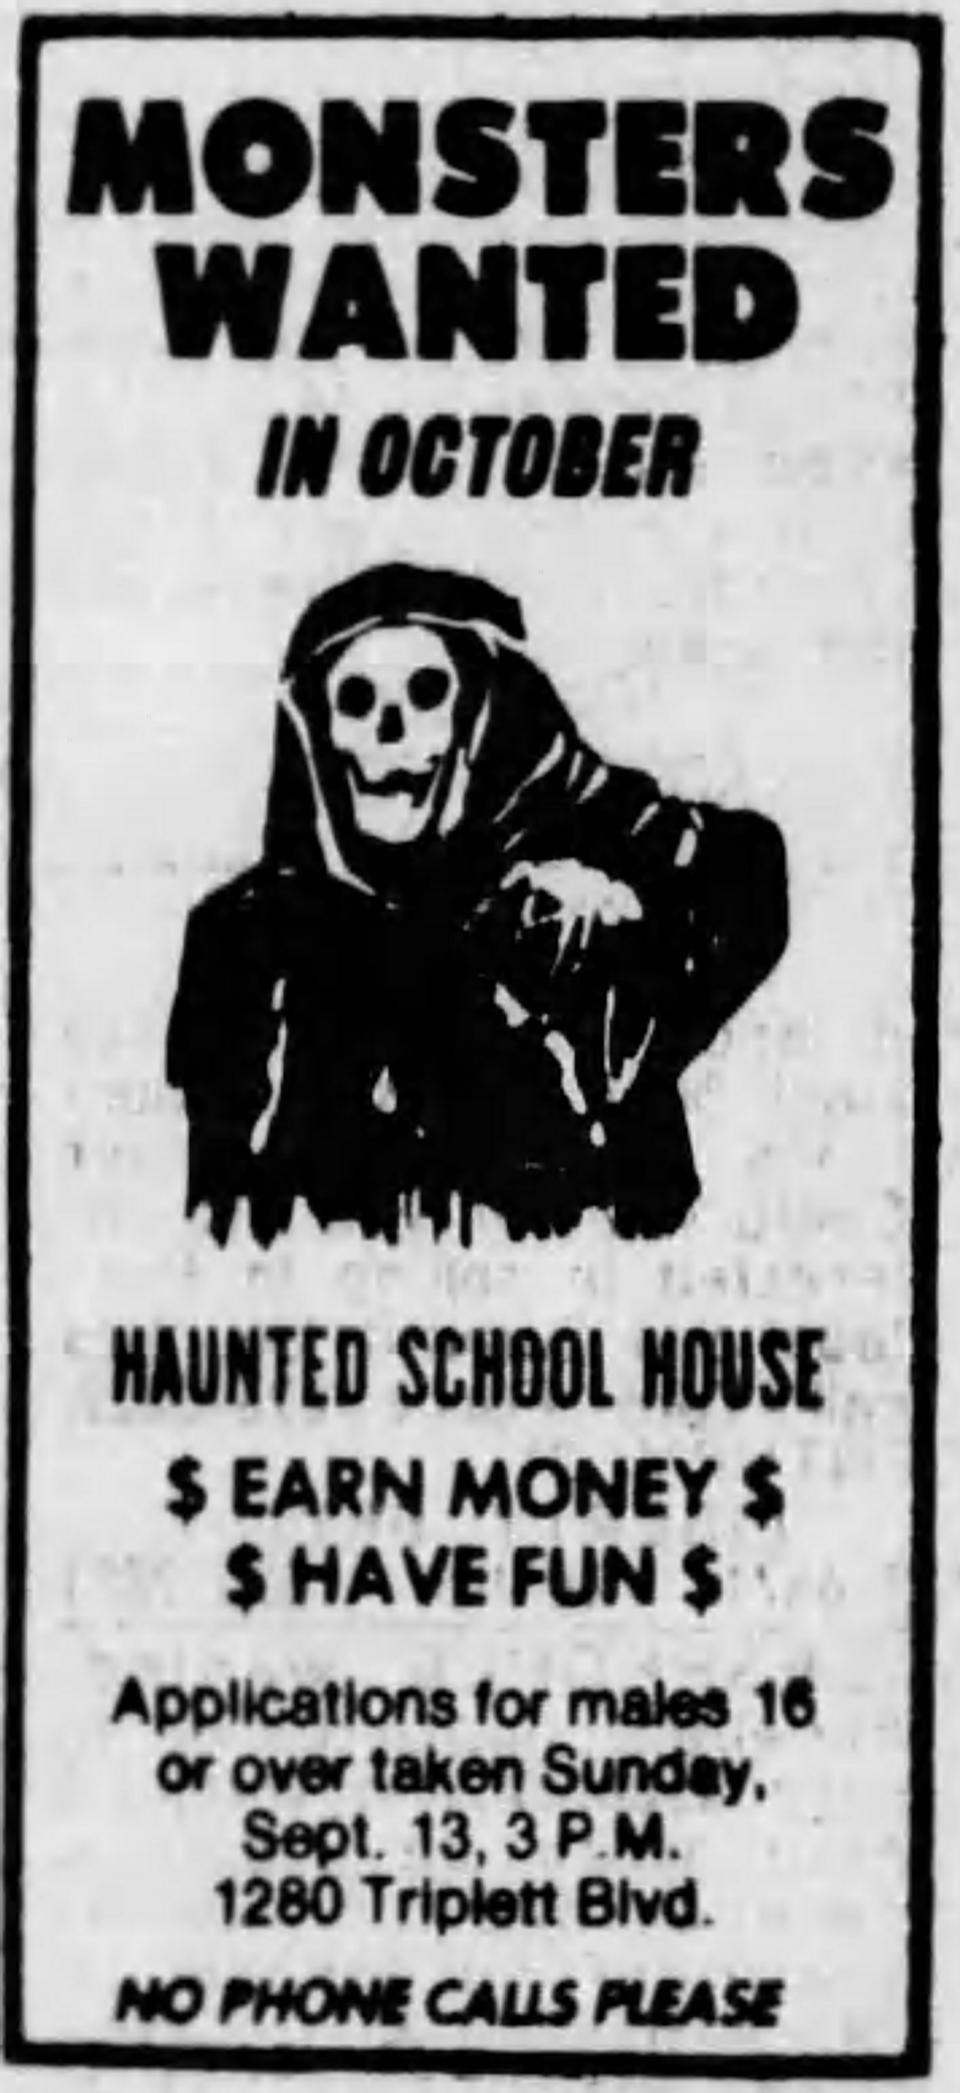 This Beacon Journal classified ad was a dream come true in 1981.